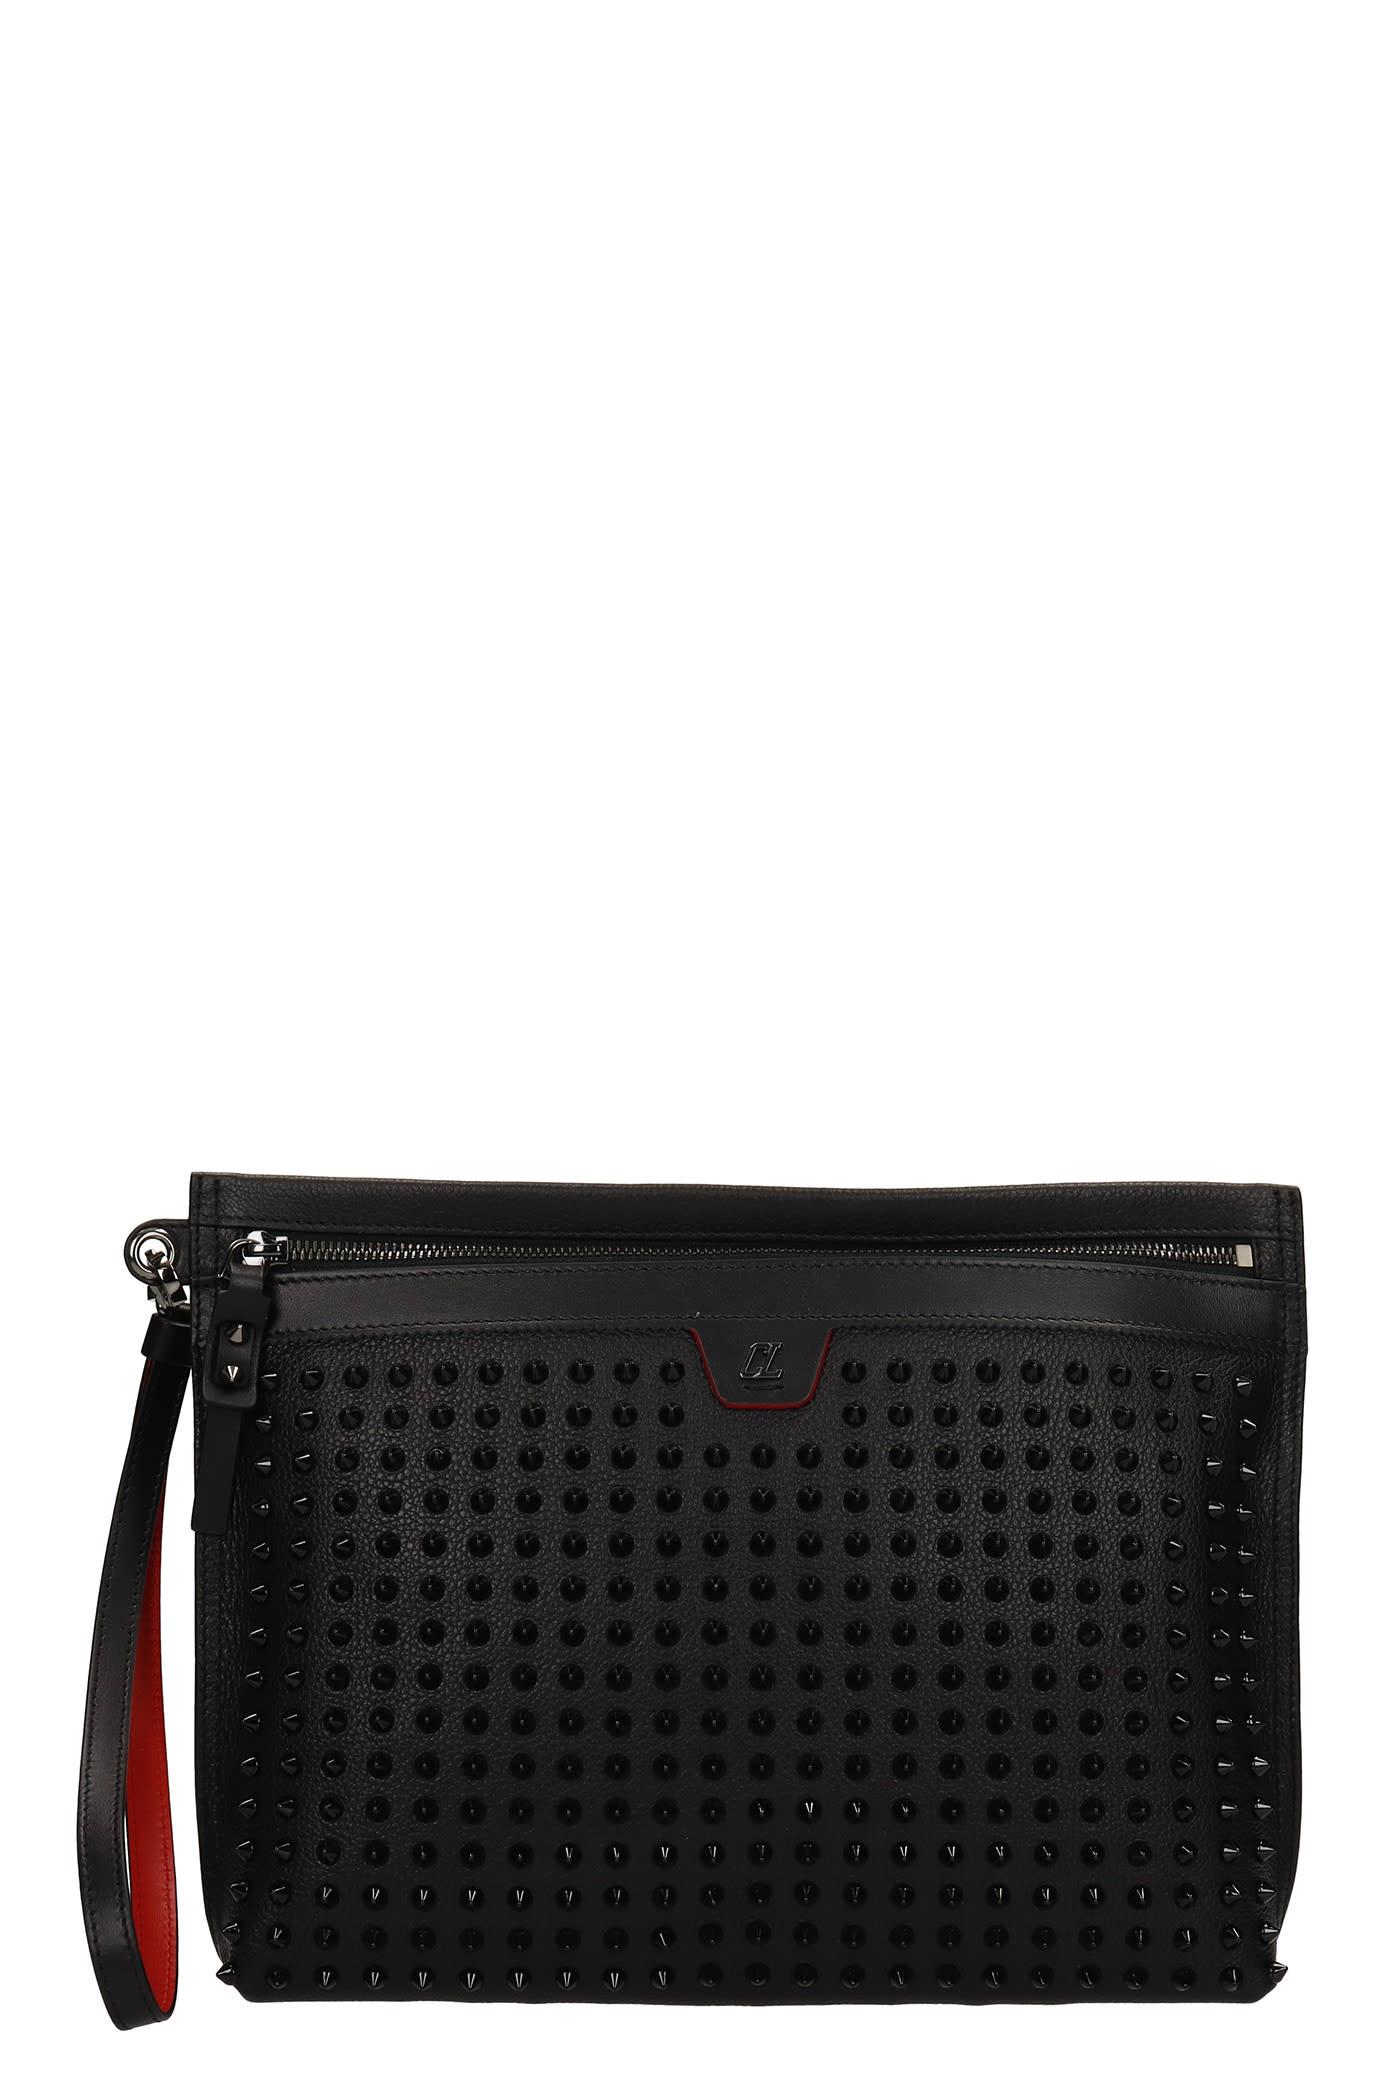 Christian Louboutin Blaster Clutch In Black Leather for Men Mens Bags Pouches and wristlets 